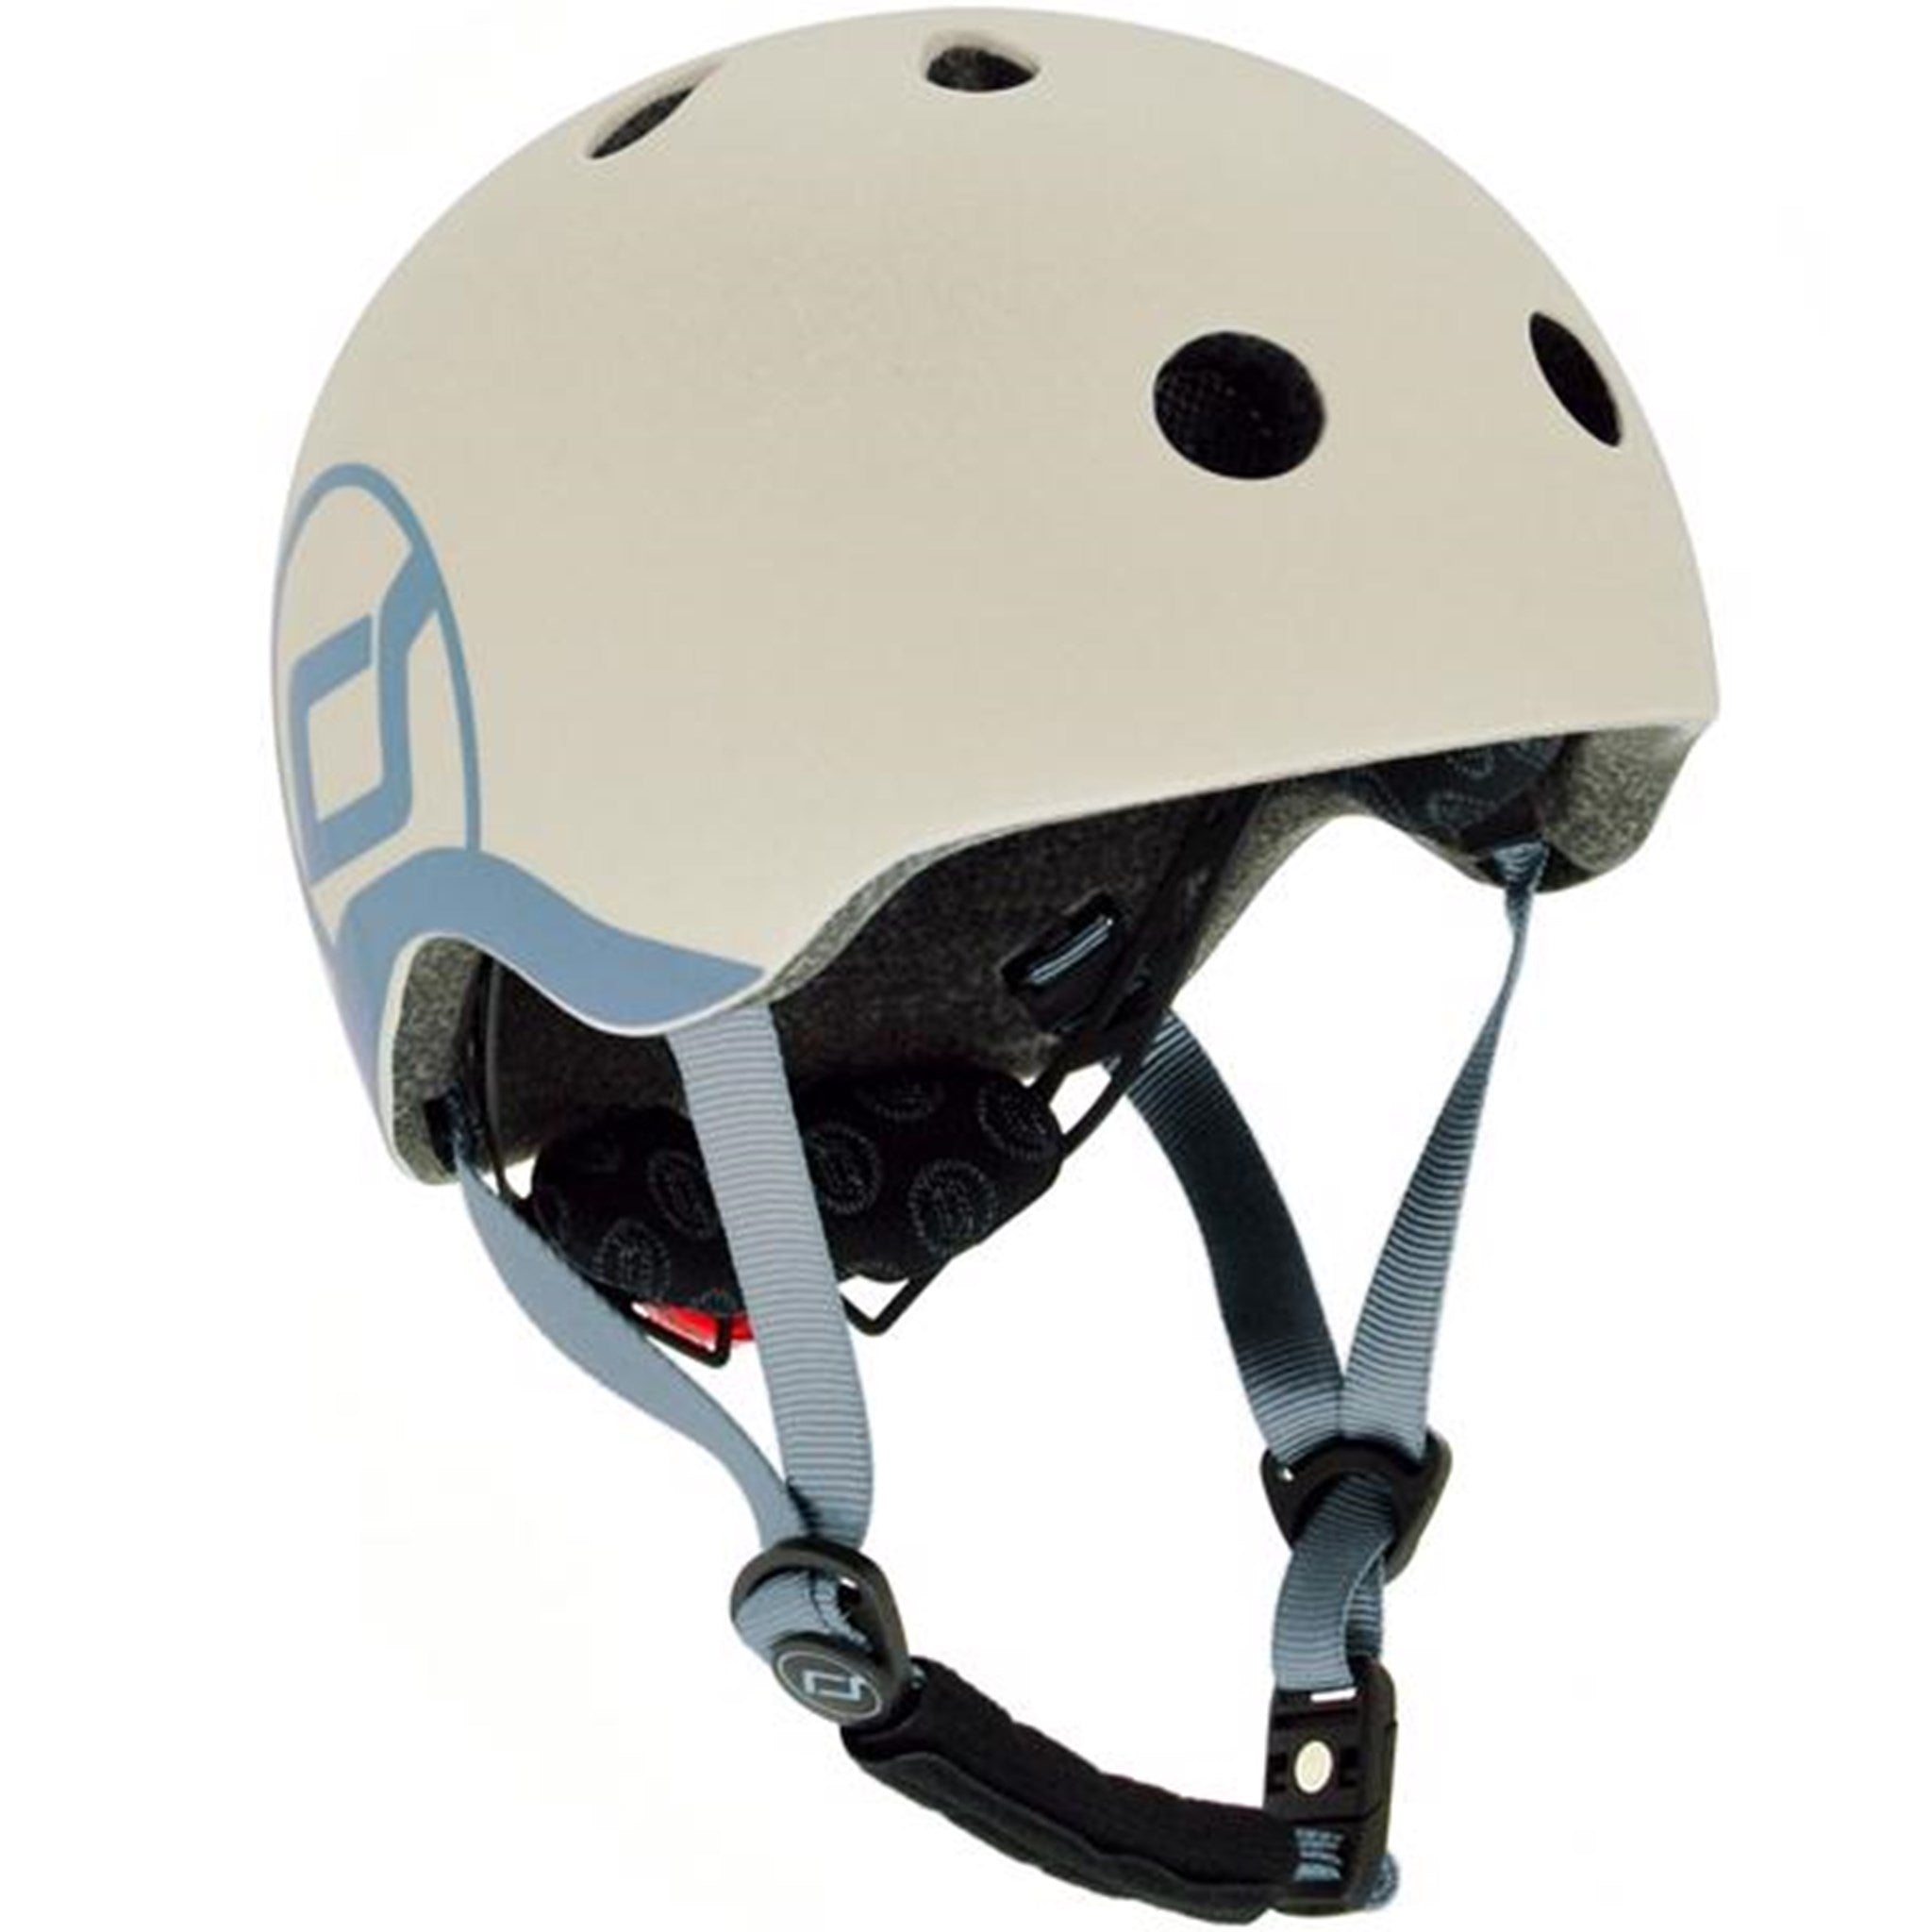 Scoot and Ride Safety Helmet Ash 2